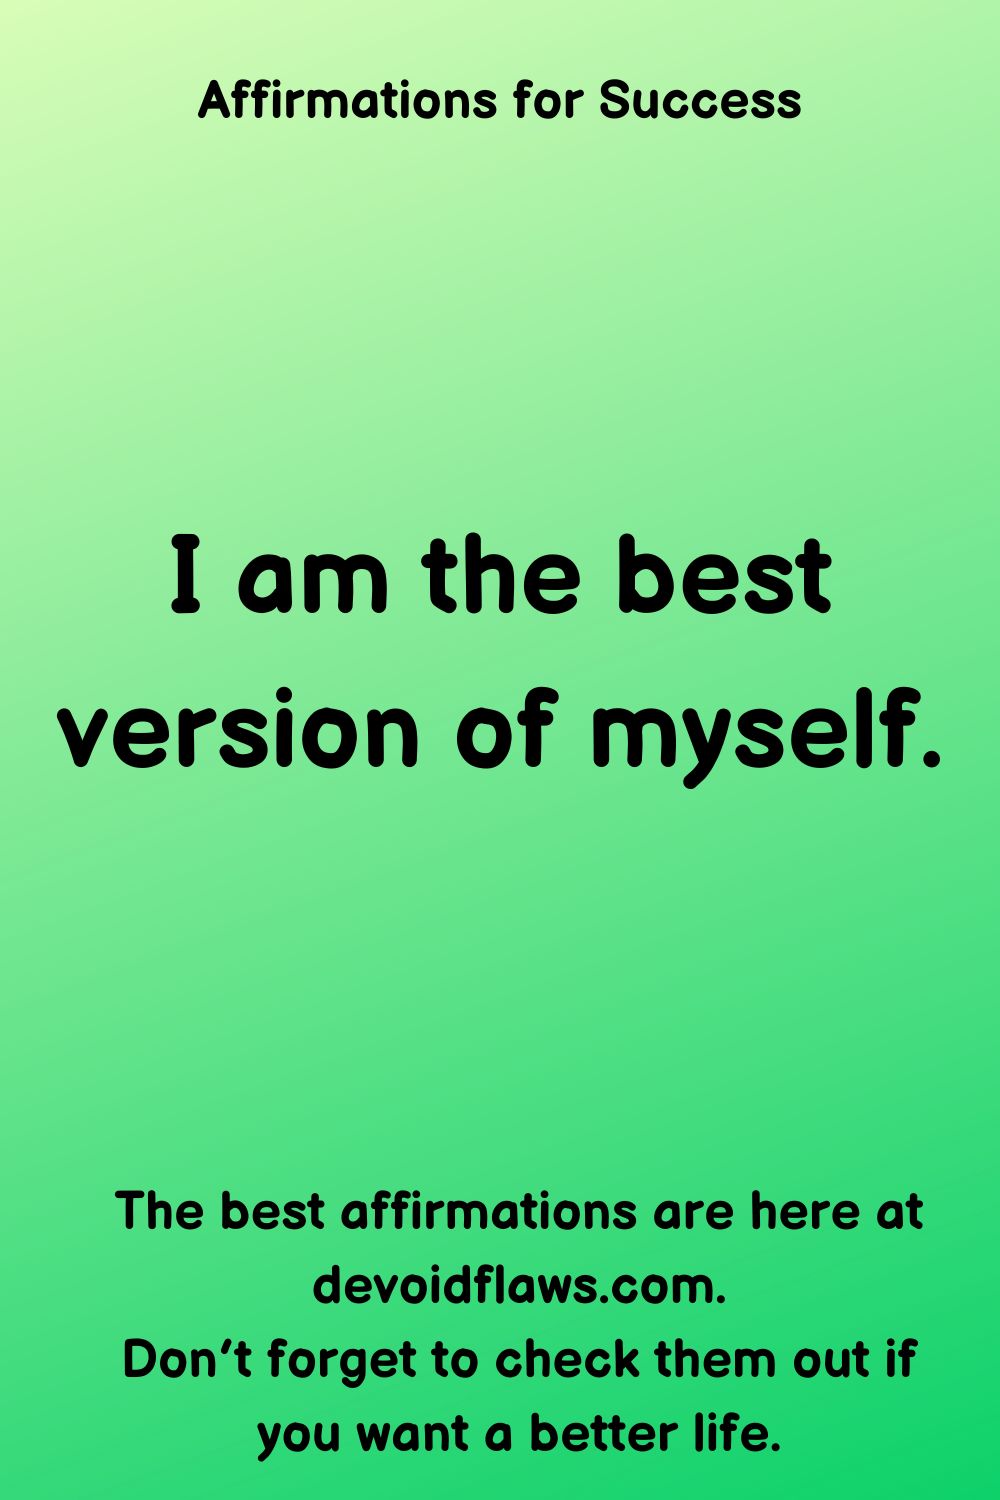 100 Self-Affirmations to Achieve Success in Life